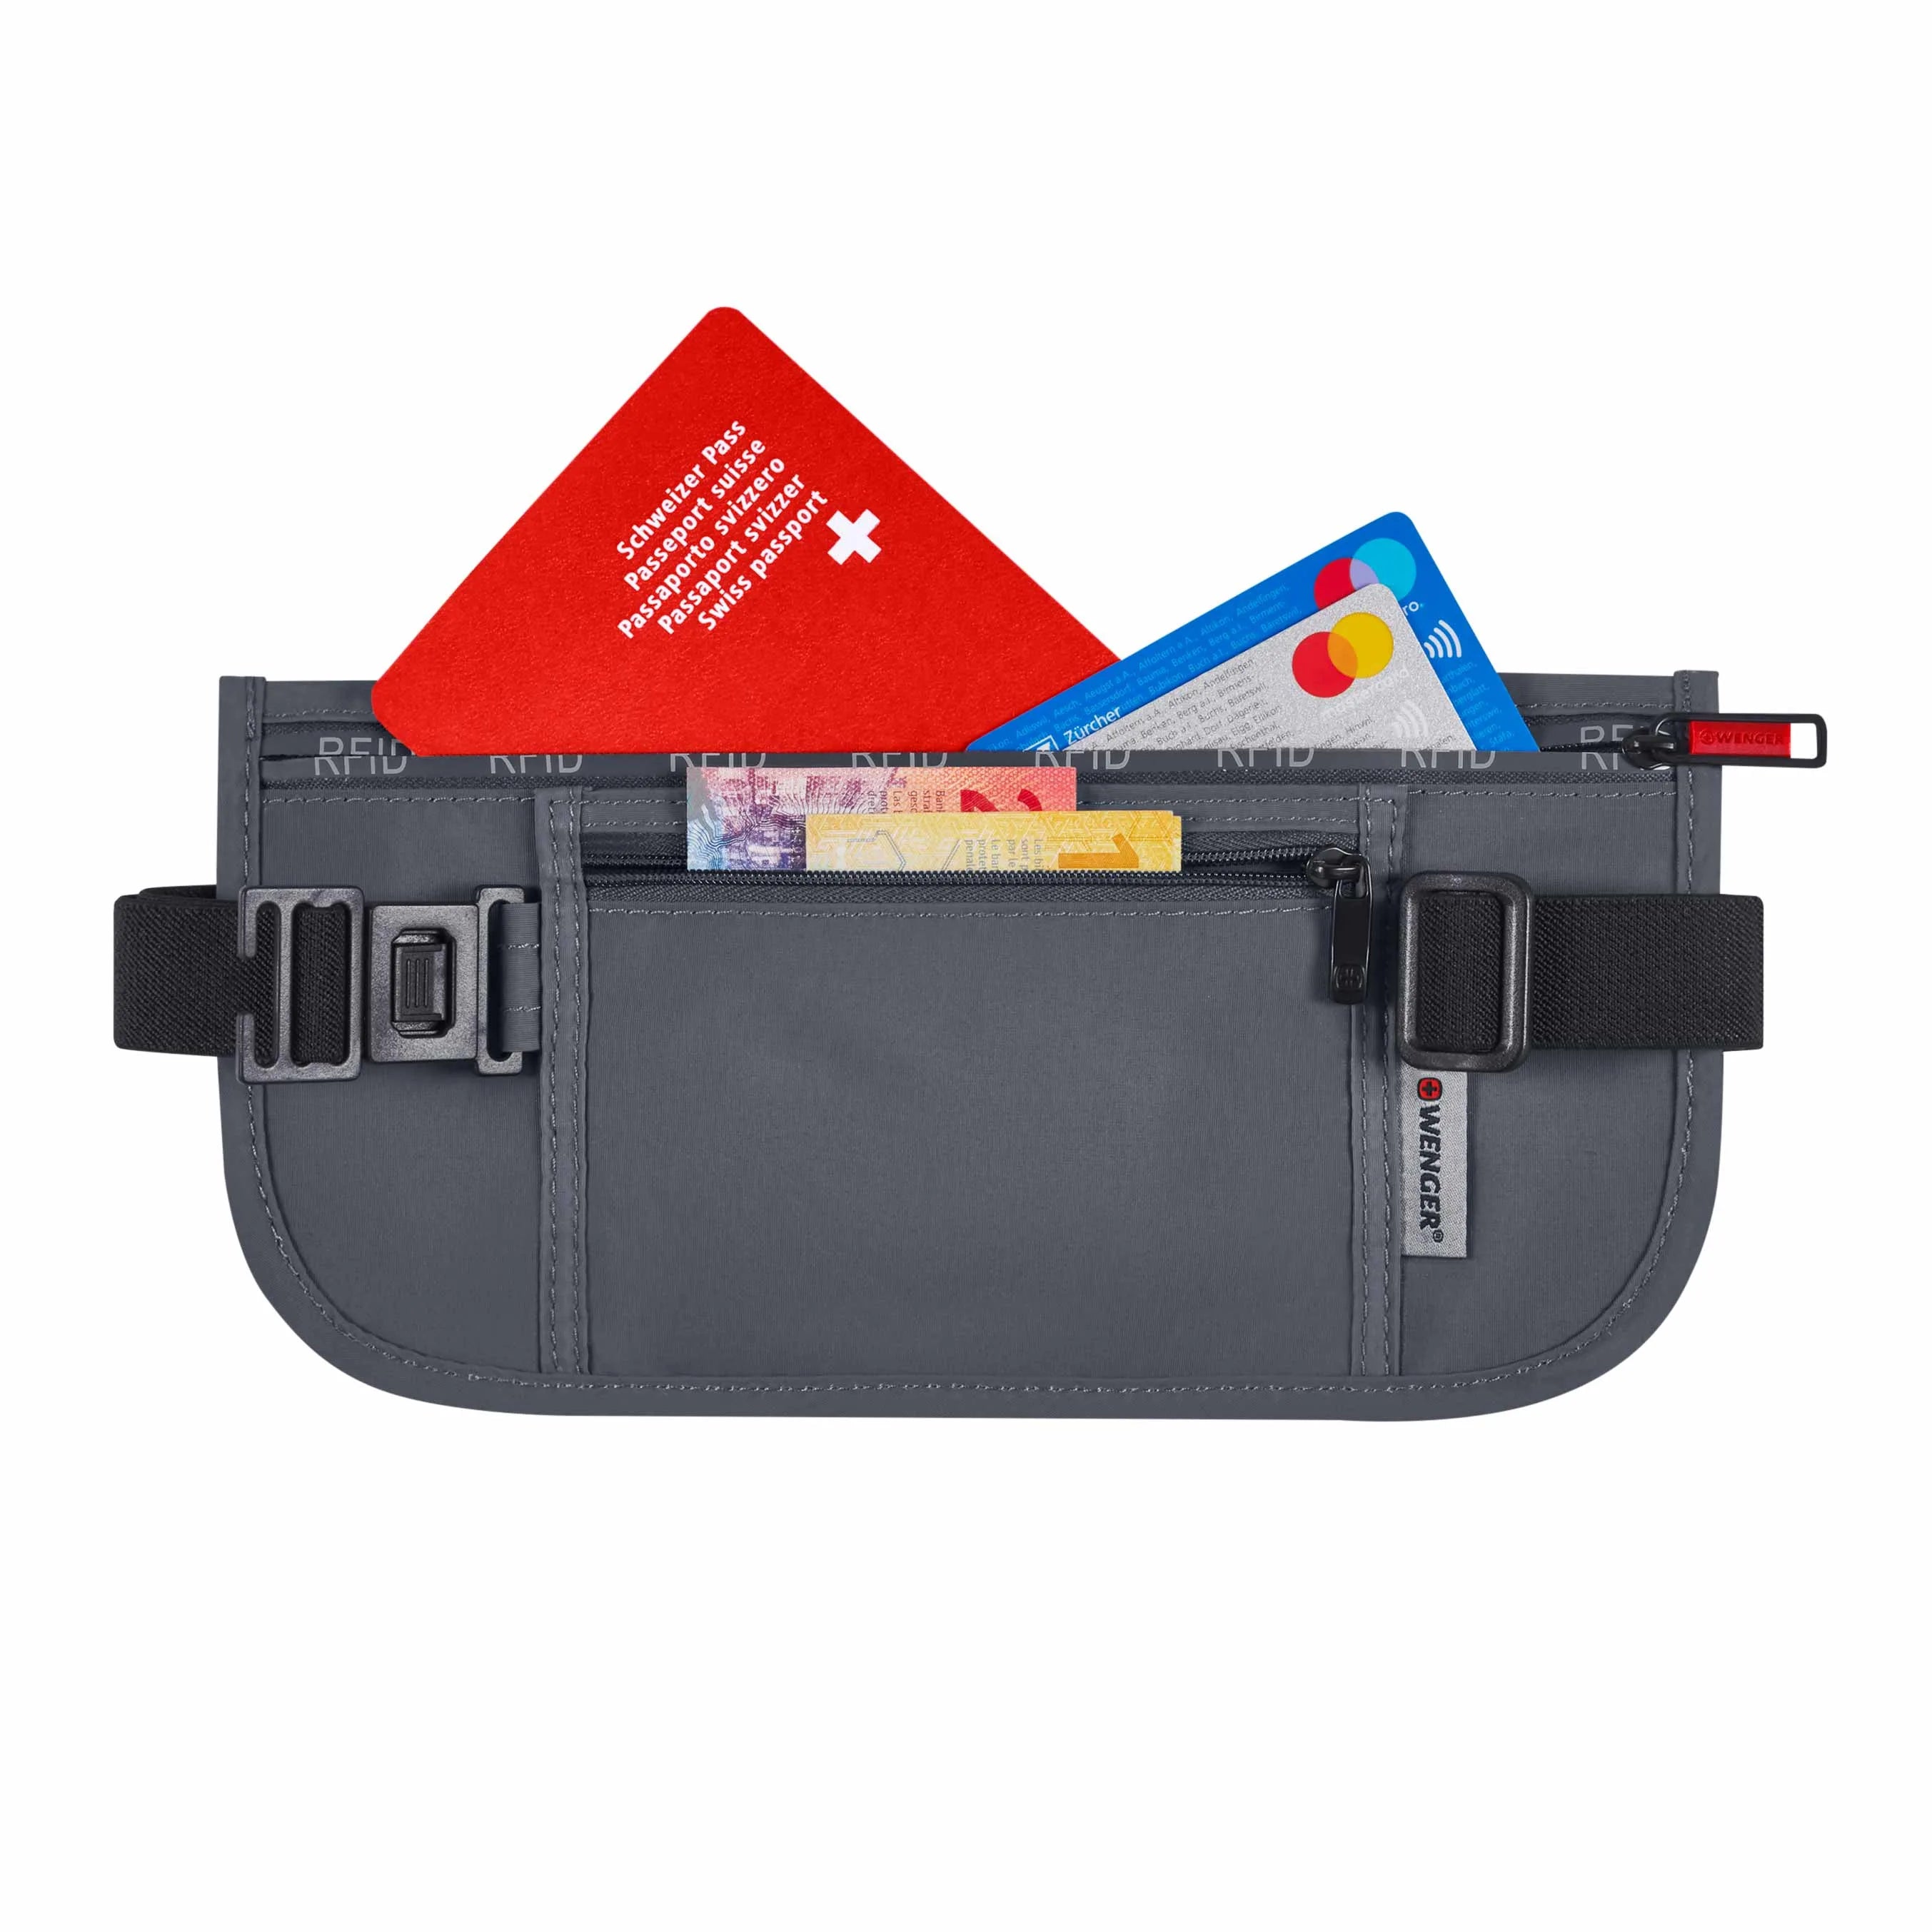 Wenger travel accessories security belt pouch with RFID protection 26 cm - Grey